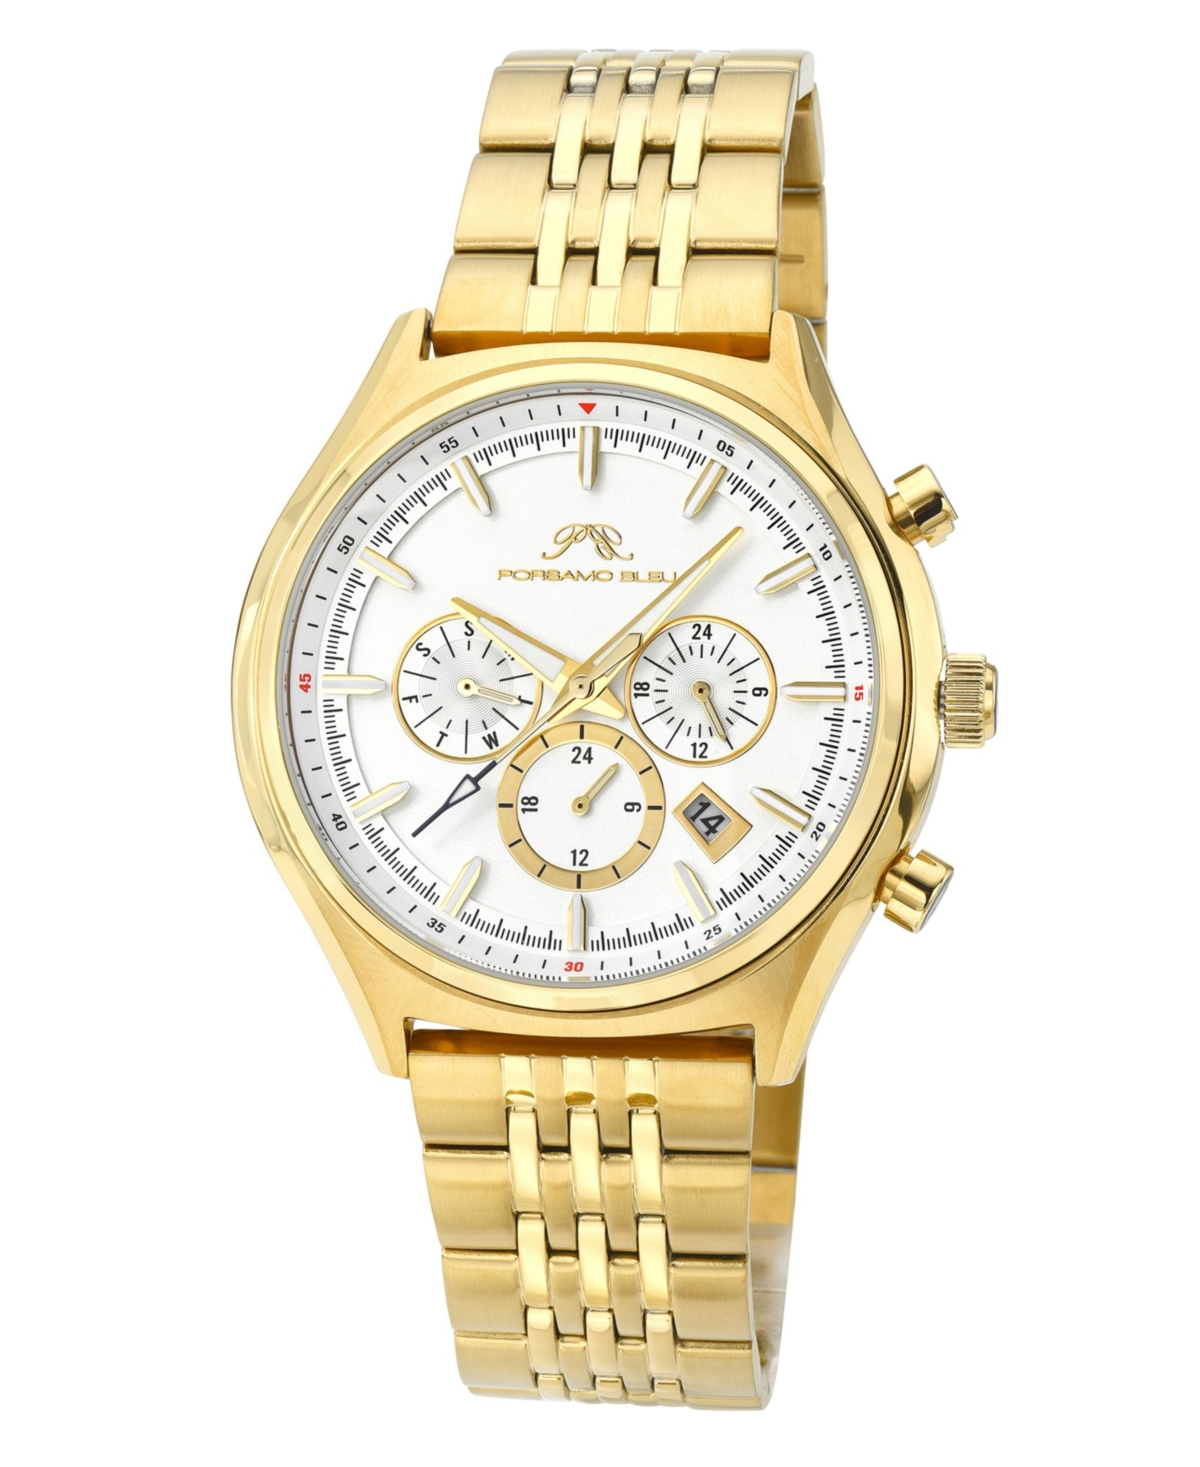 Charlie Stainless Steel Multifunction Gold Tone Men's Watch 1261ECHS - Gold